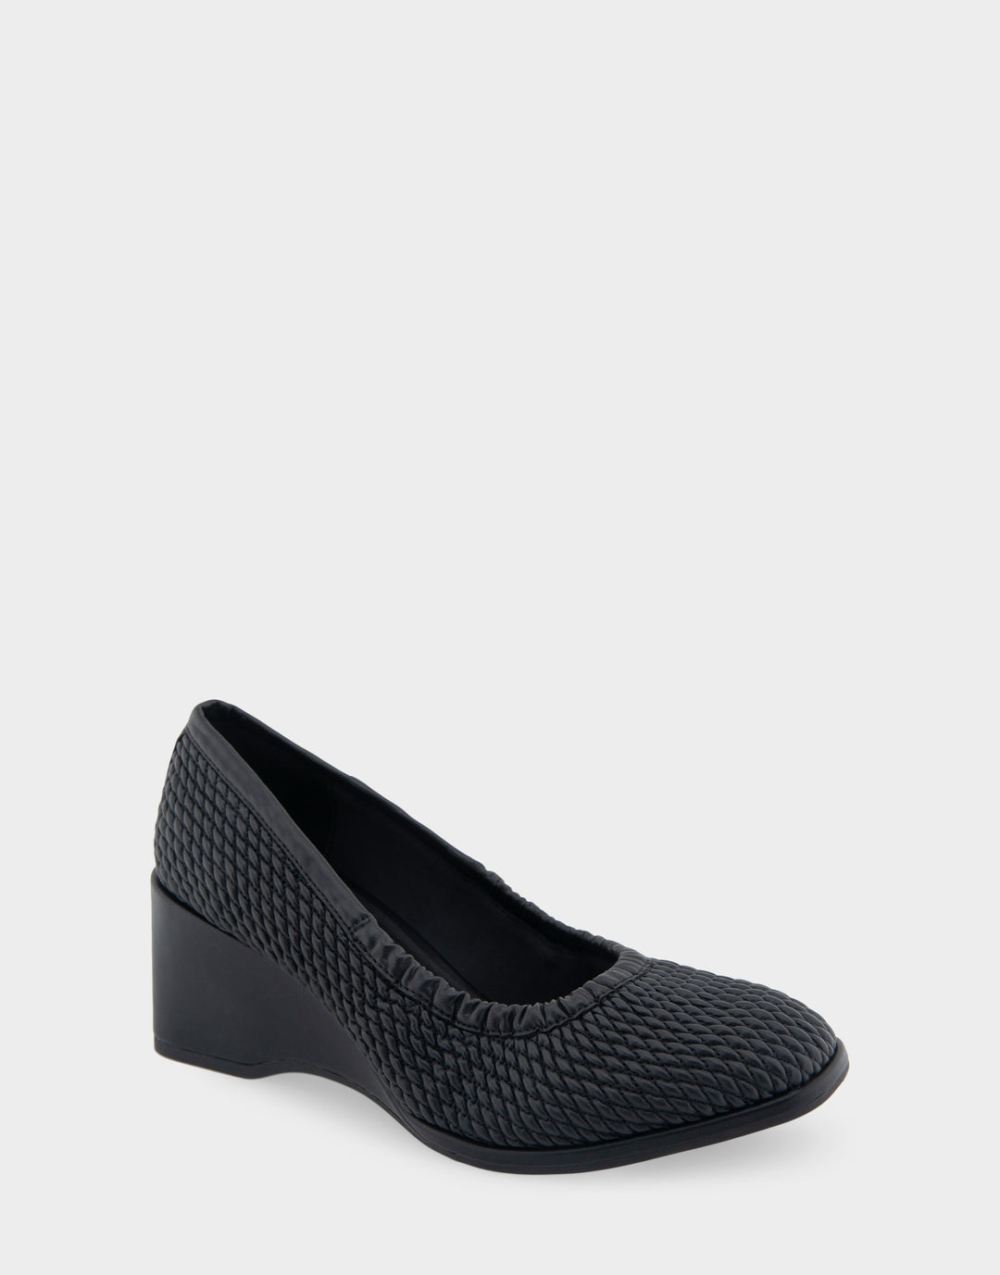 Women's | Airlie Black Quilted Faux Leather Wedge Pump